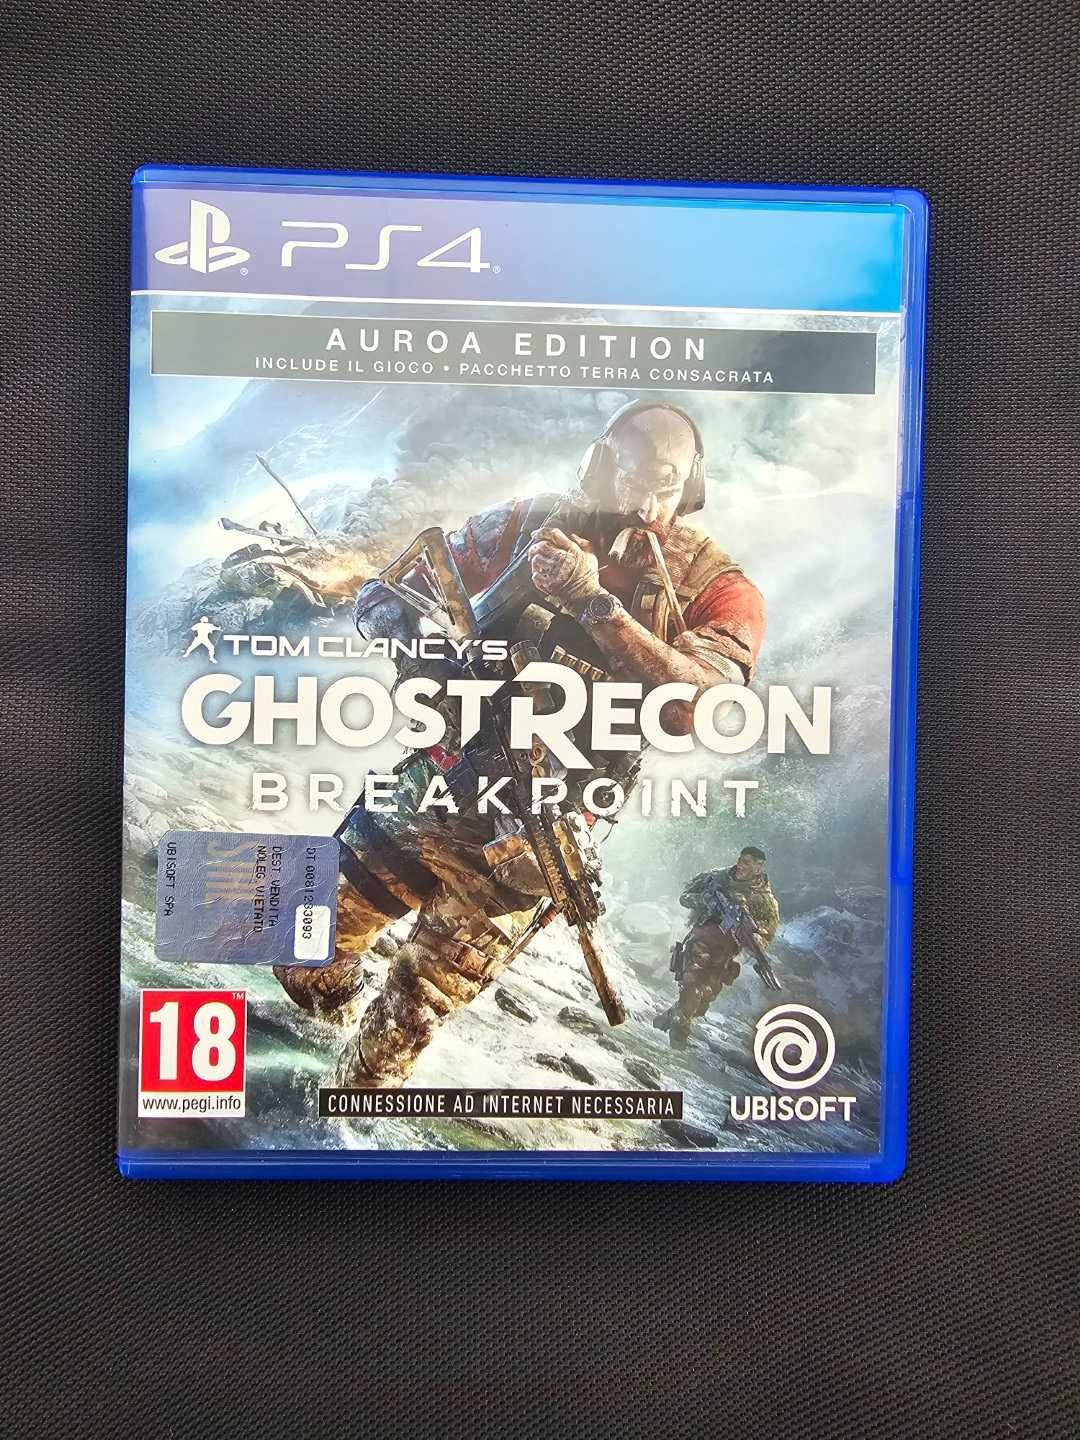 GHOST RECON Breakpoint Aurora Edition PL gra na PS4